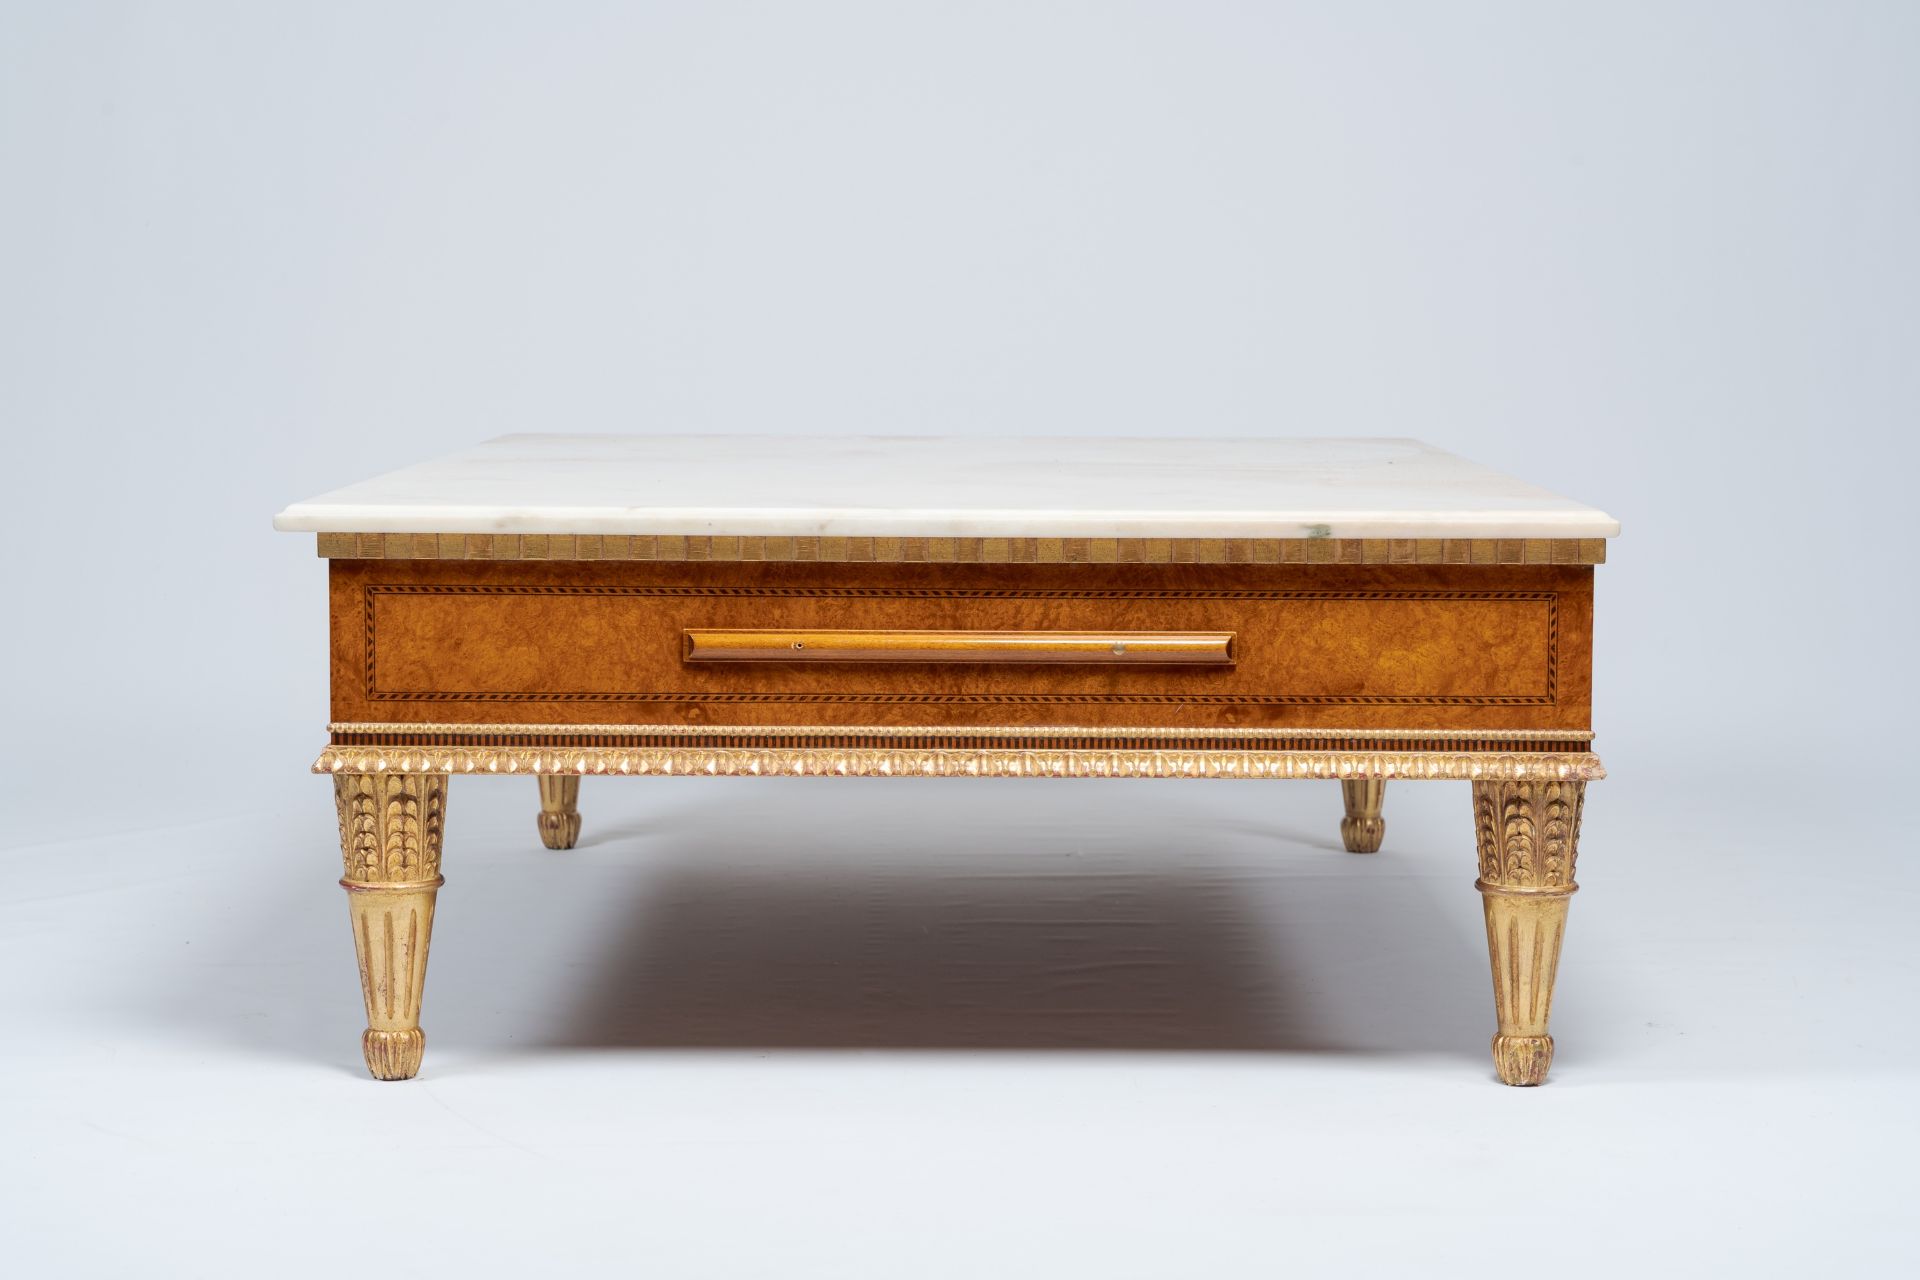 A Neoclassical partly gilt wood coffee table with marble top and four extendable plateaus, 20th C. - Image 6 of 8